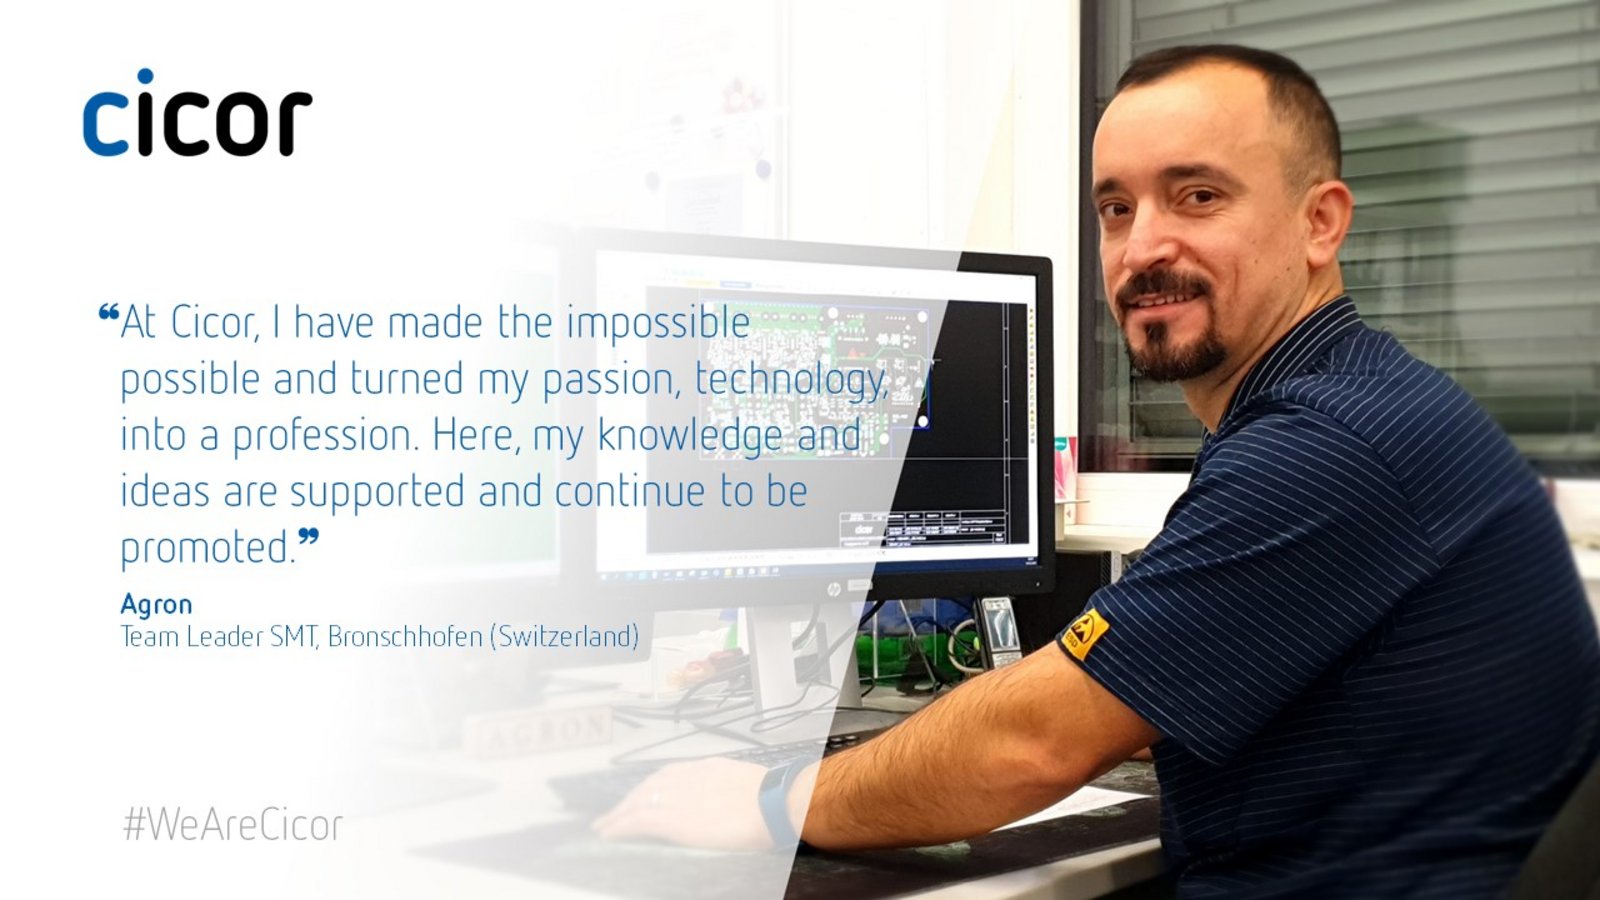 Testimonial of Agron who works at the Cicor site in Bronschhofen